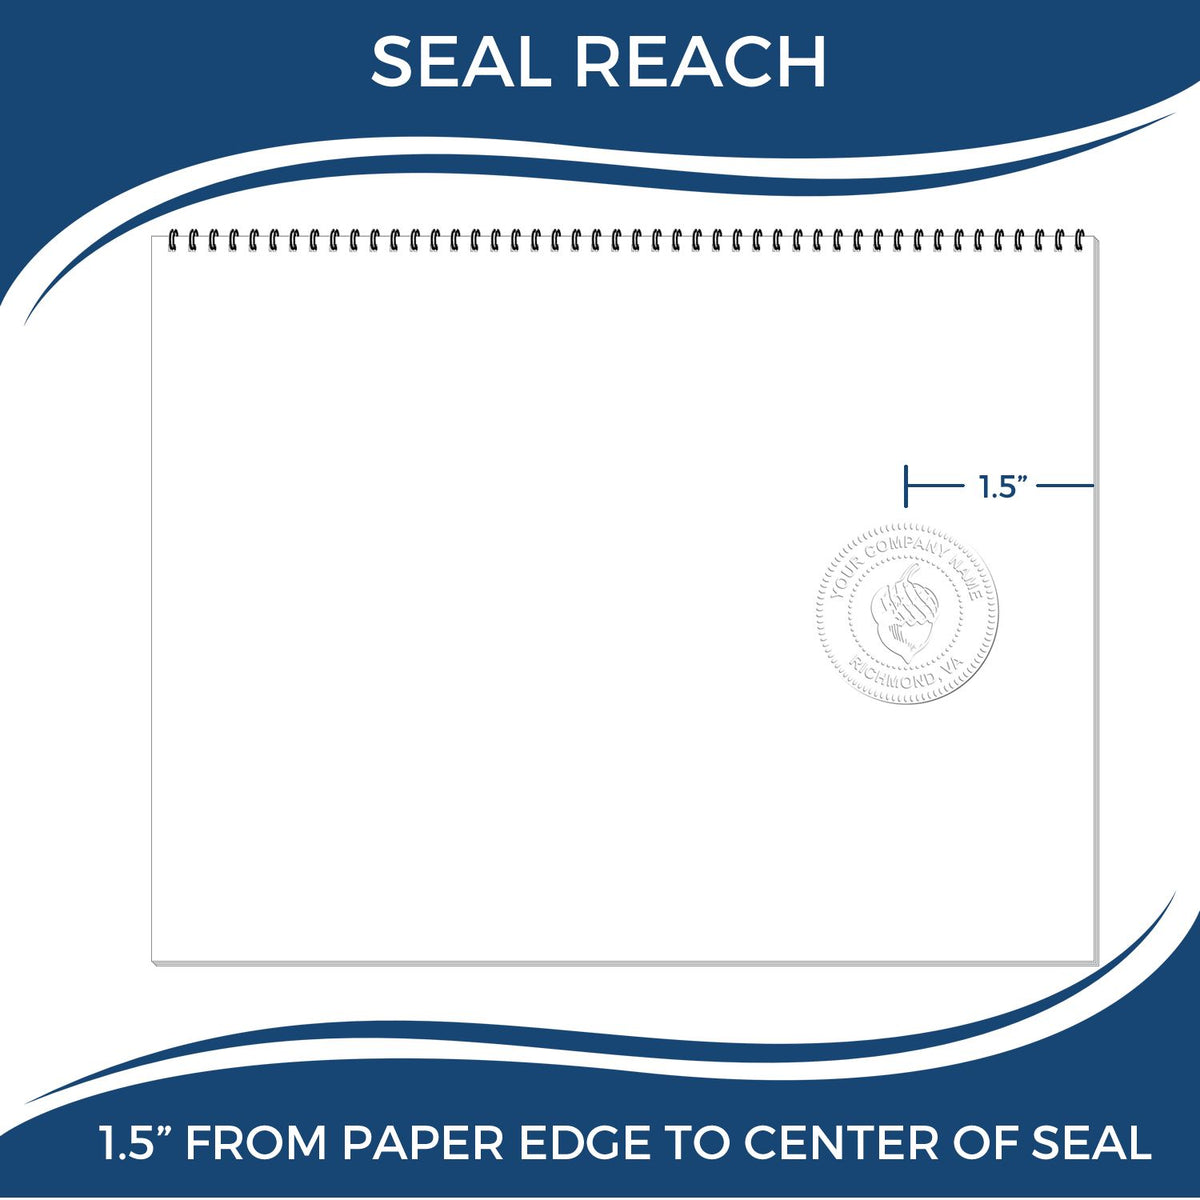 An infographic showing the seal reach which is represented by a ruler and a miniature seal image of the Gift Tennessee Engineer Seal